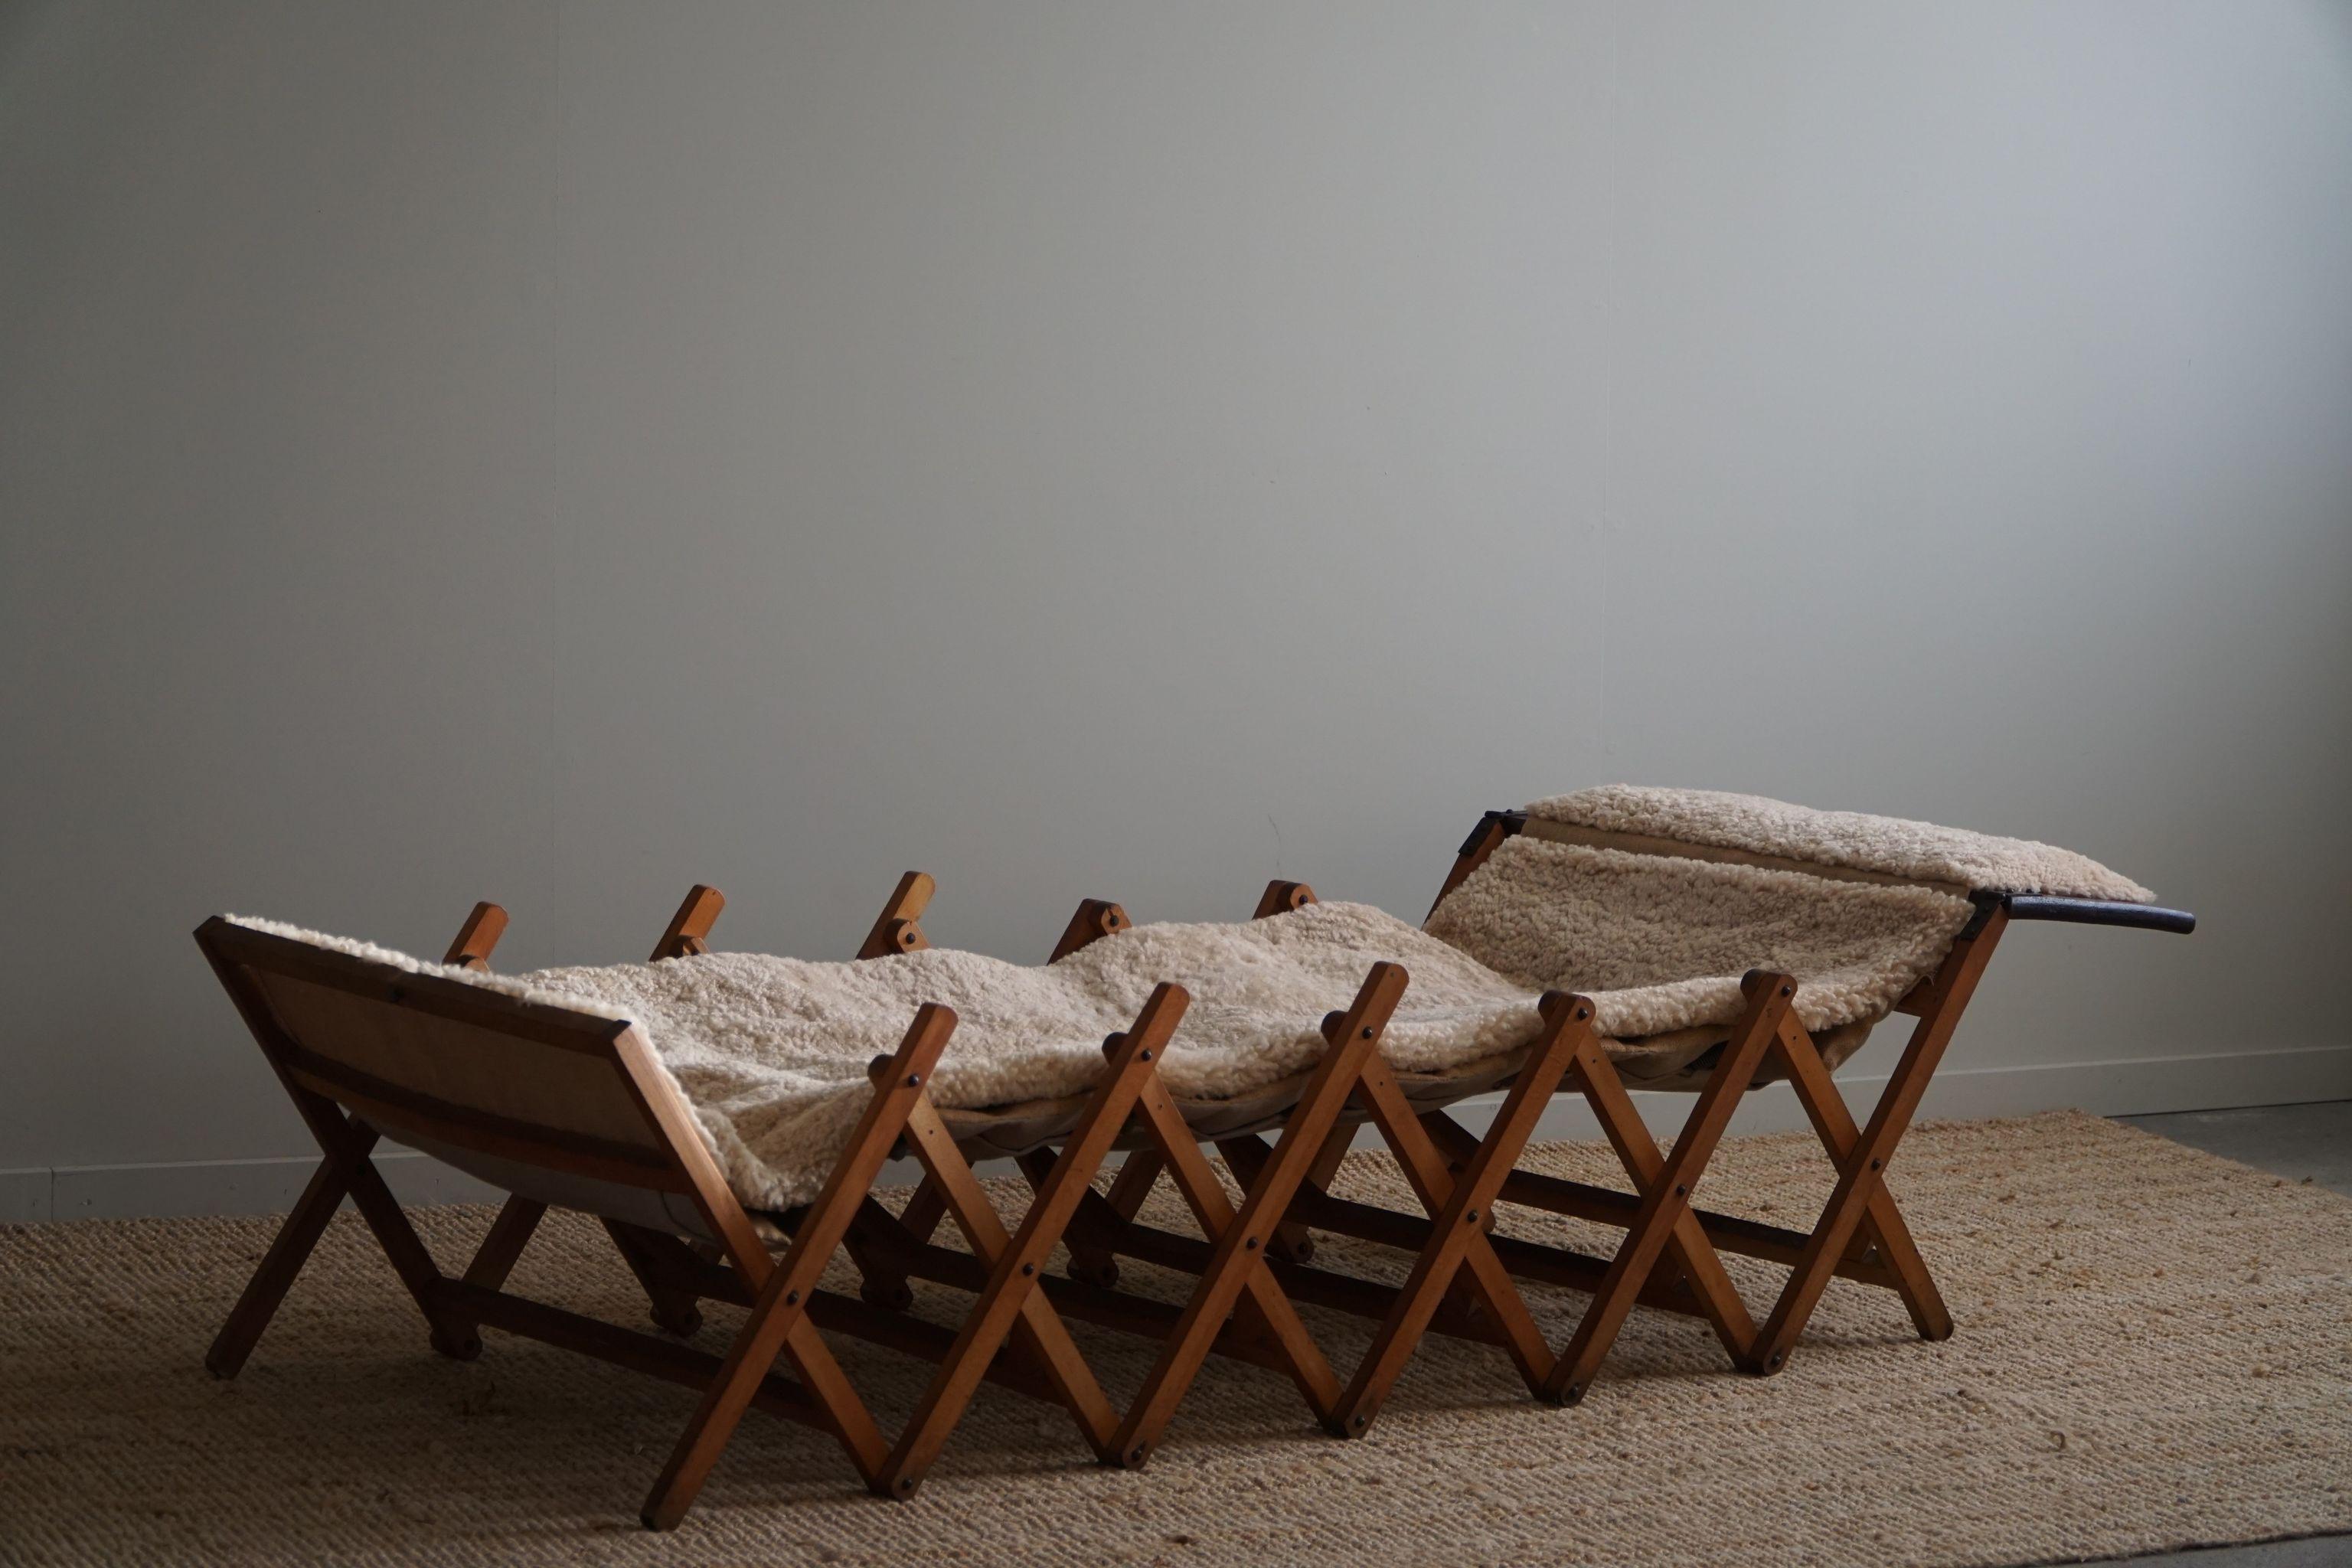 Hand-Crafted Folding Daybed in Hessian & Lambswool, Made by a Danish Cabinetmaker, 1930s For Sale